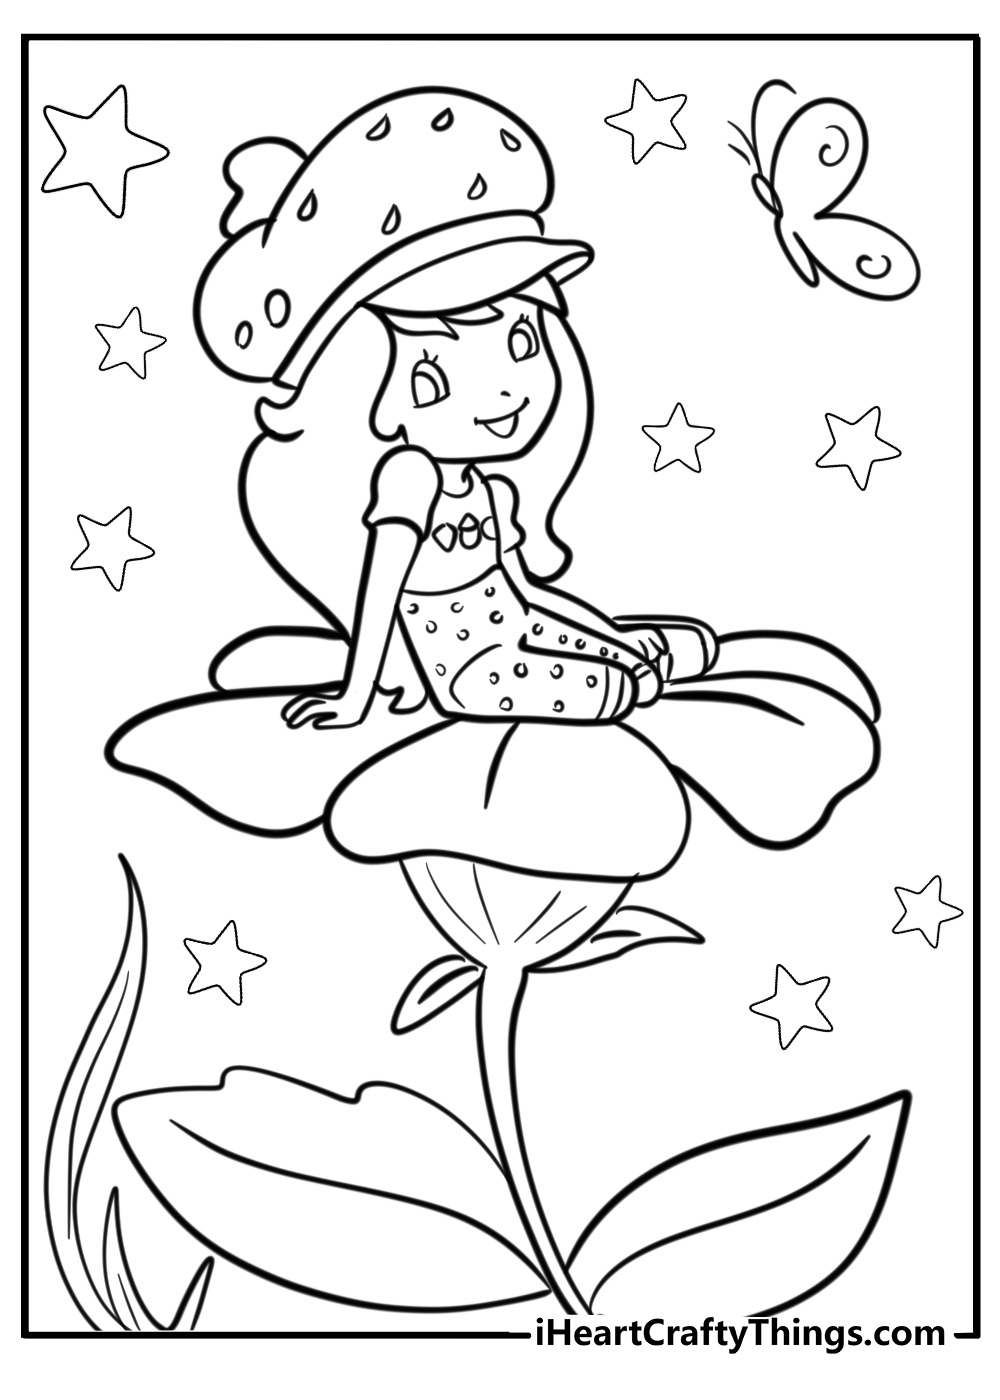 Strawberry shortcake coloring page sitting on large flower